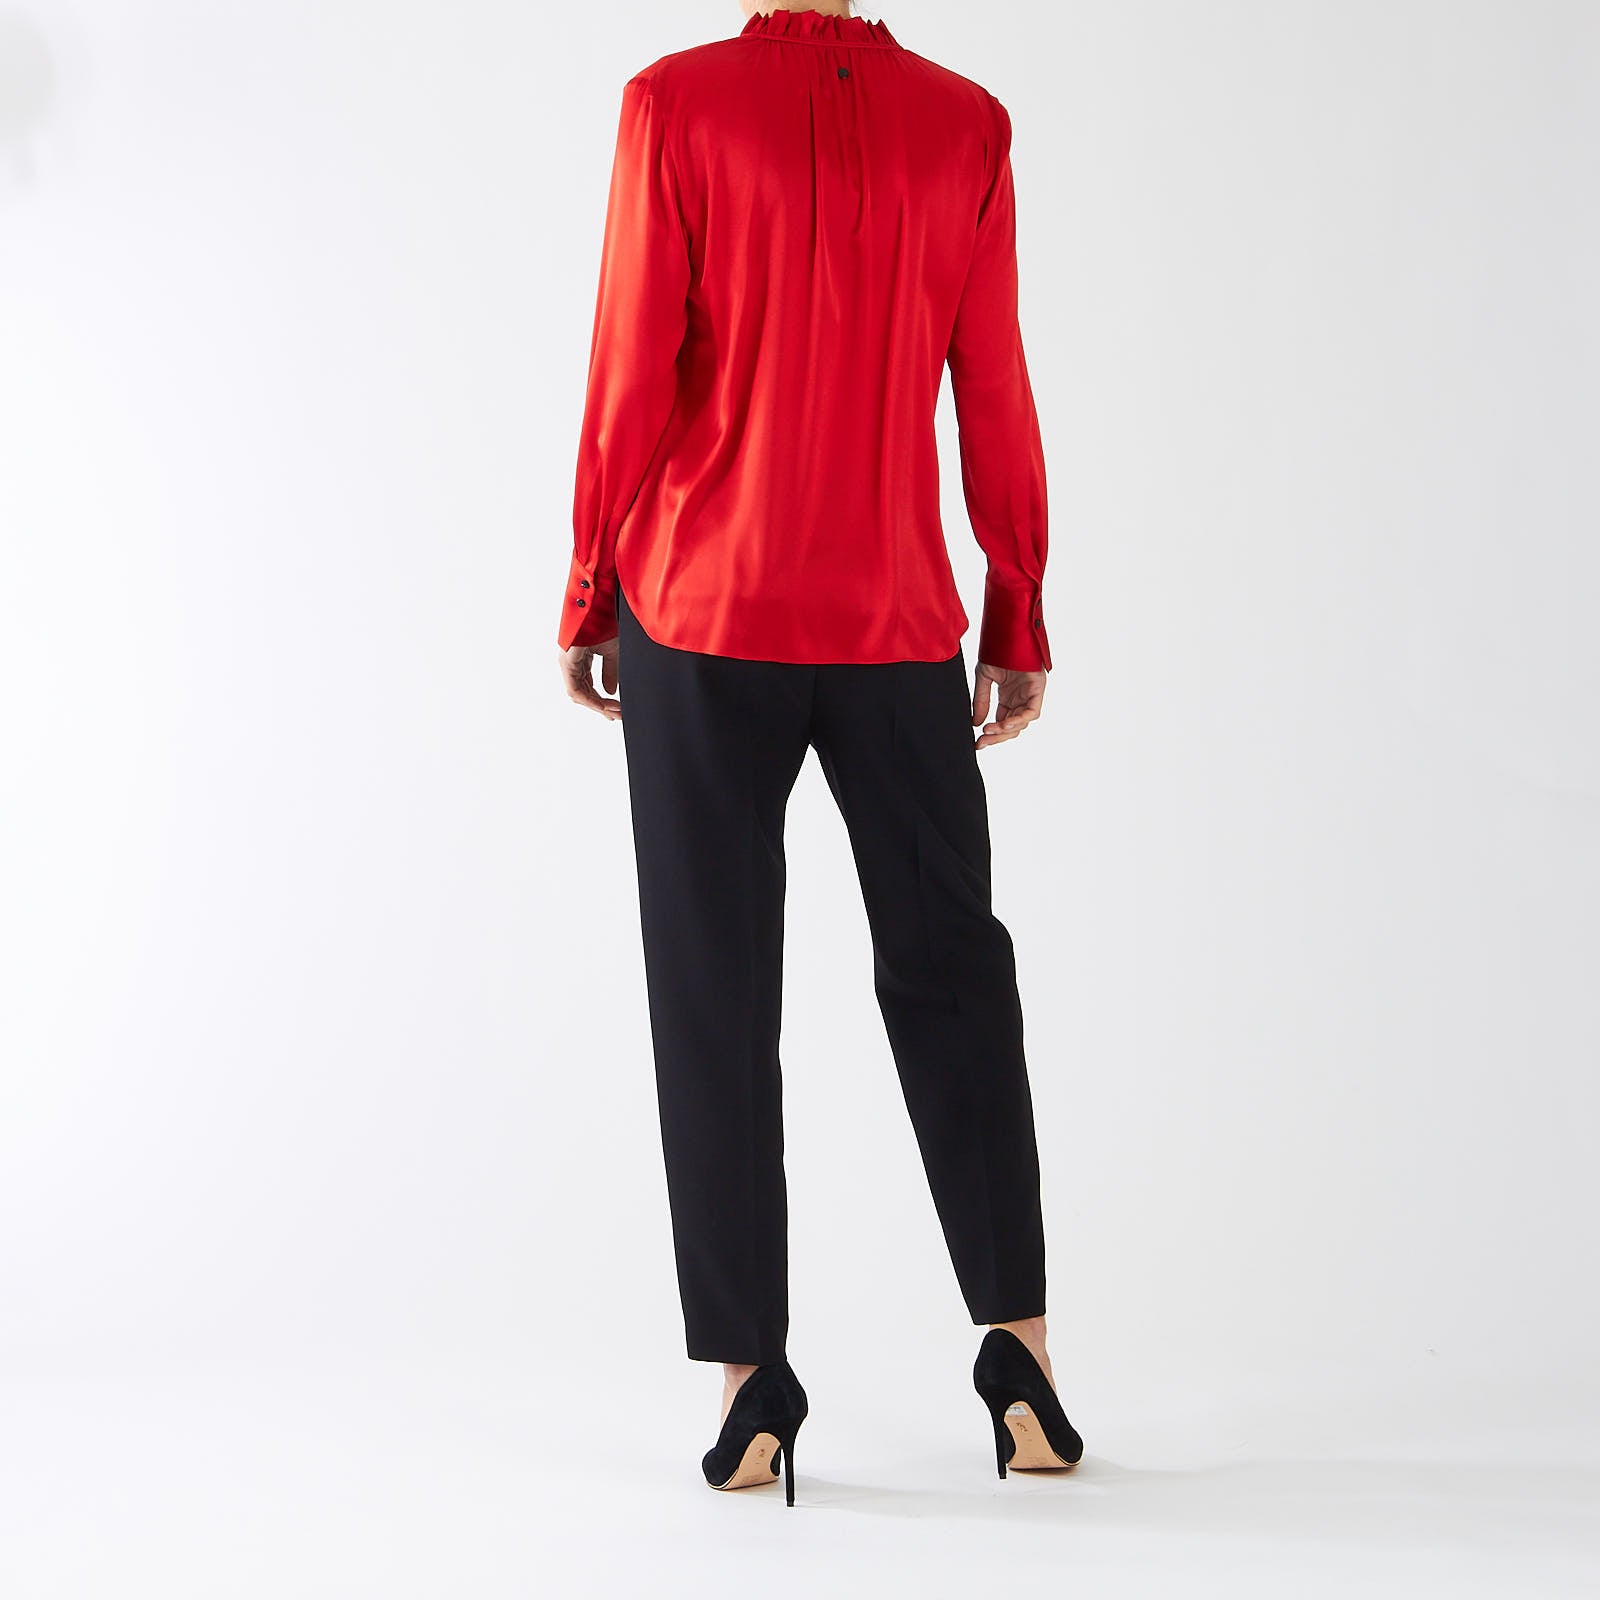 Bright Fire Red Silk Frill Blouse